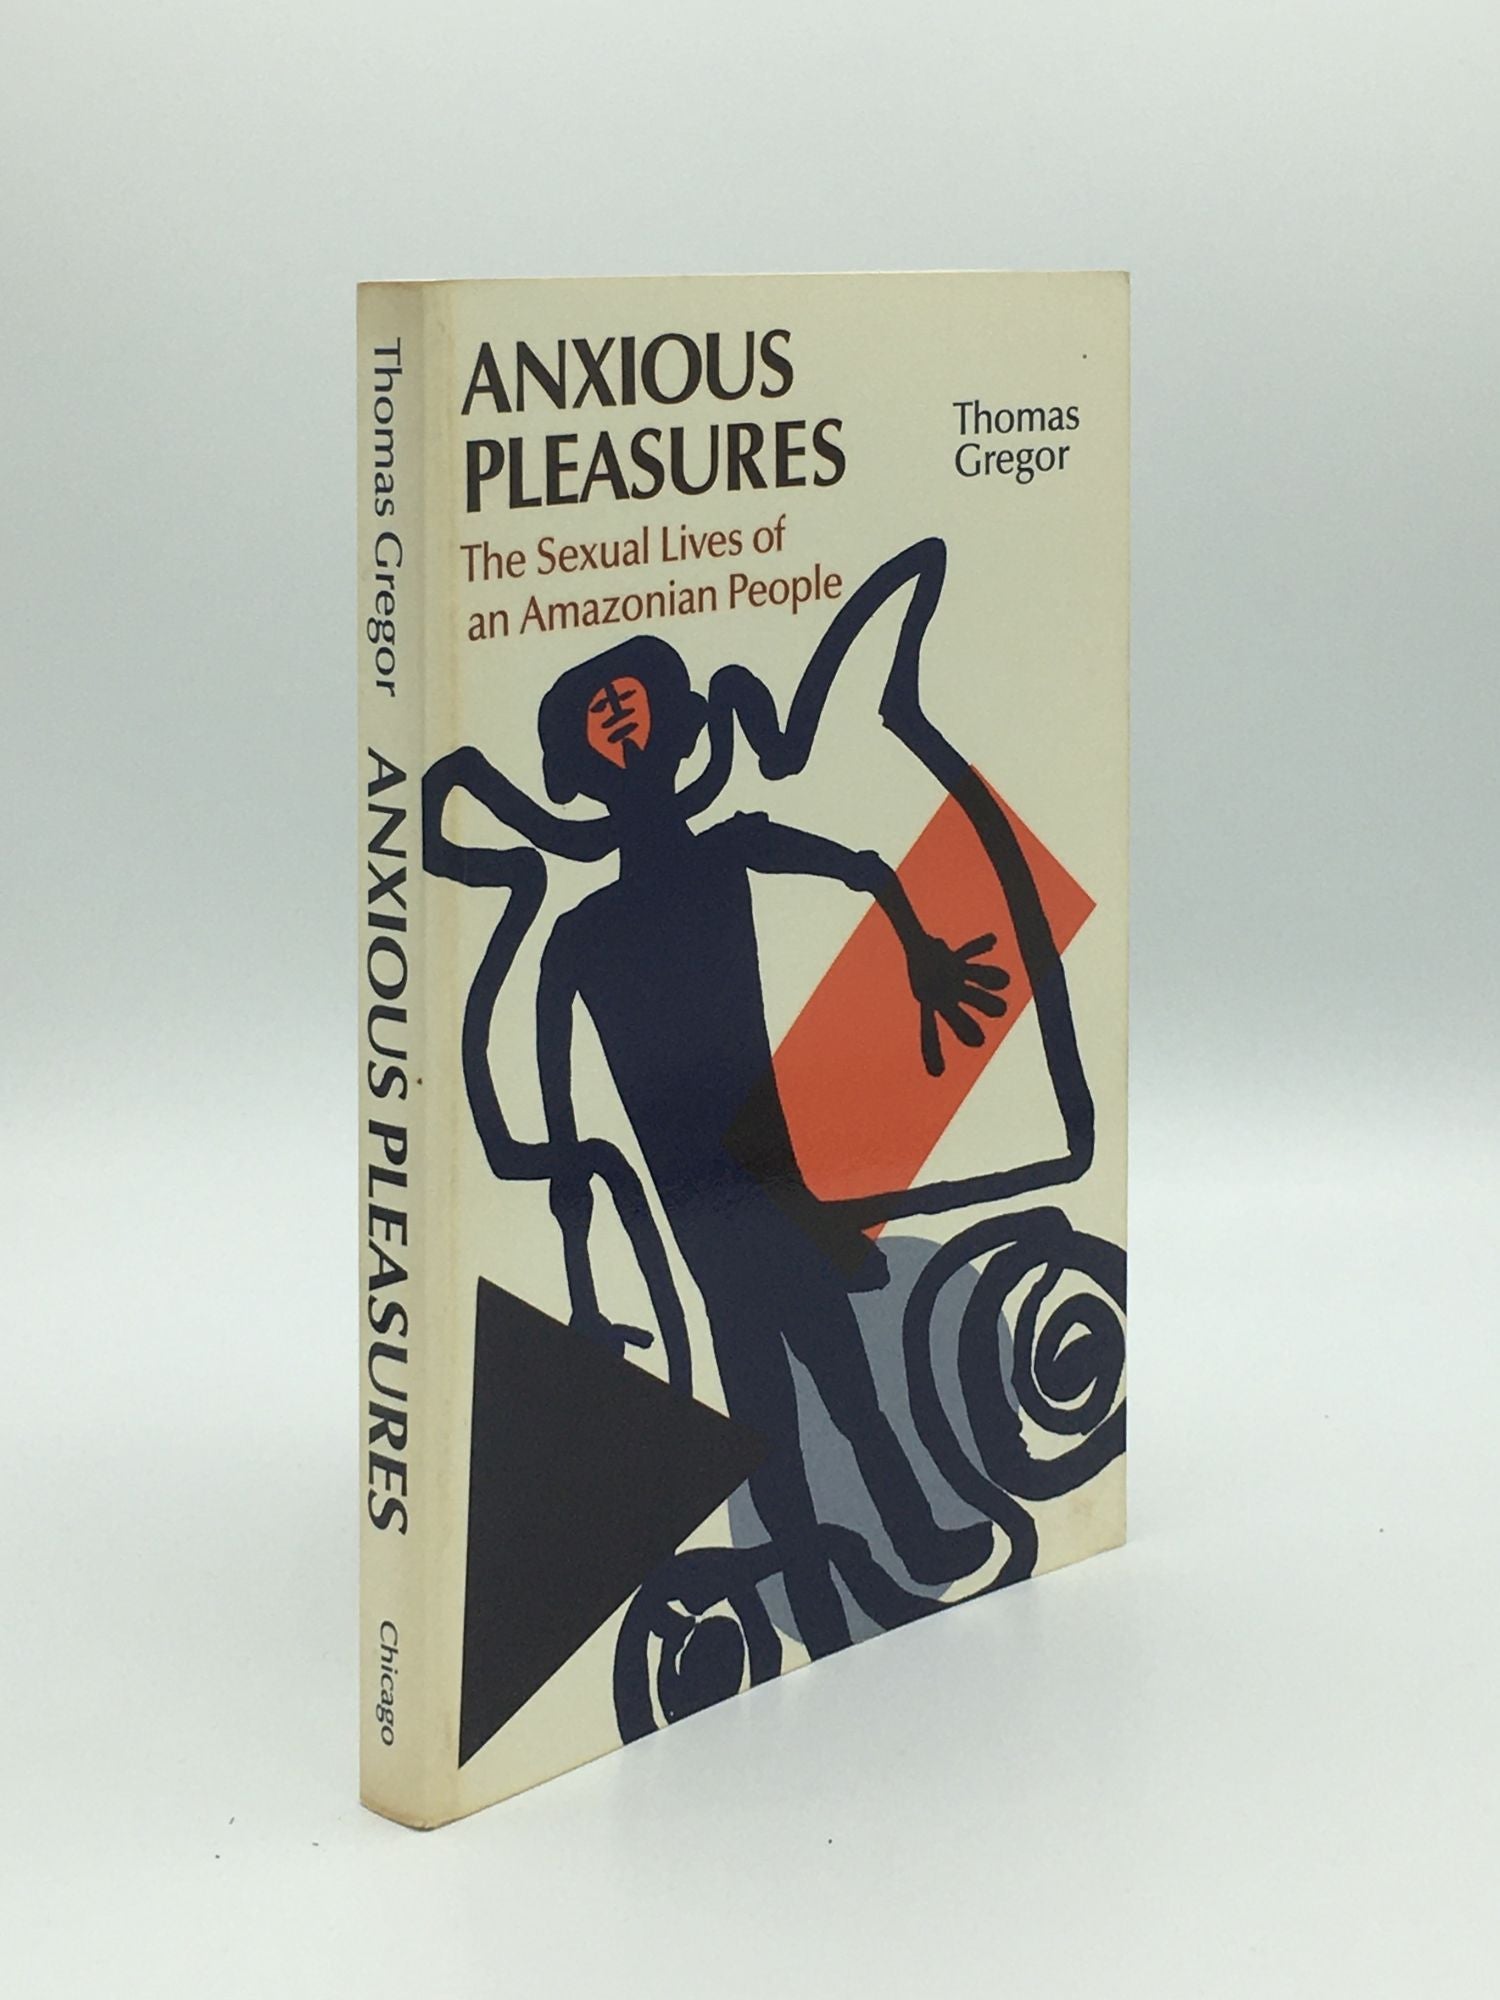 GREGOR Thomas - Anxious Pleasures the Sexual Lives of an Amazonian People